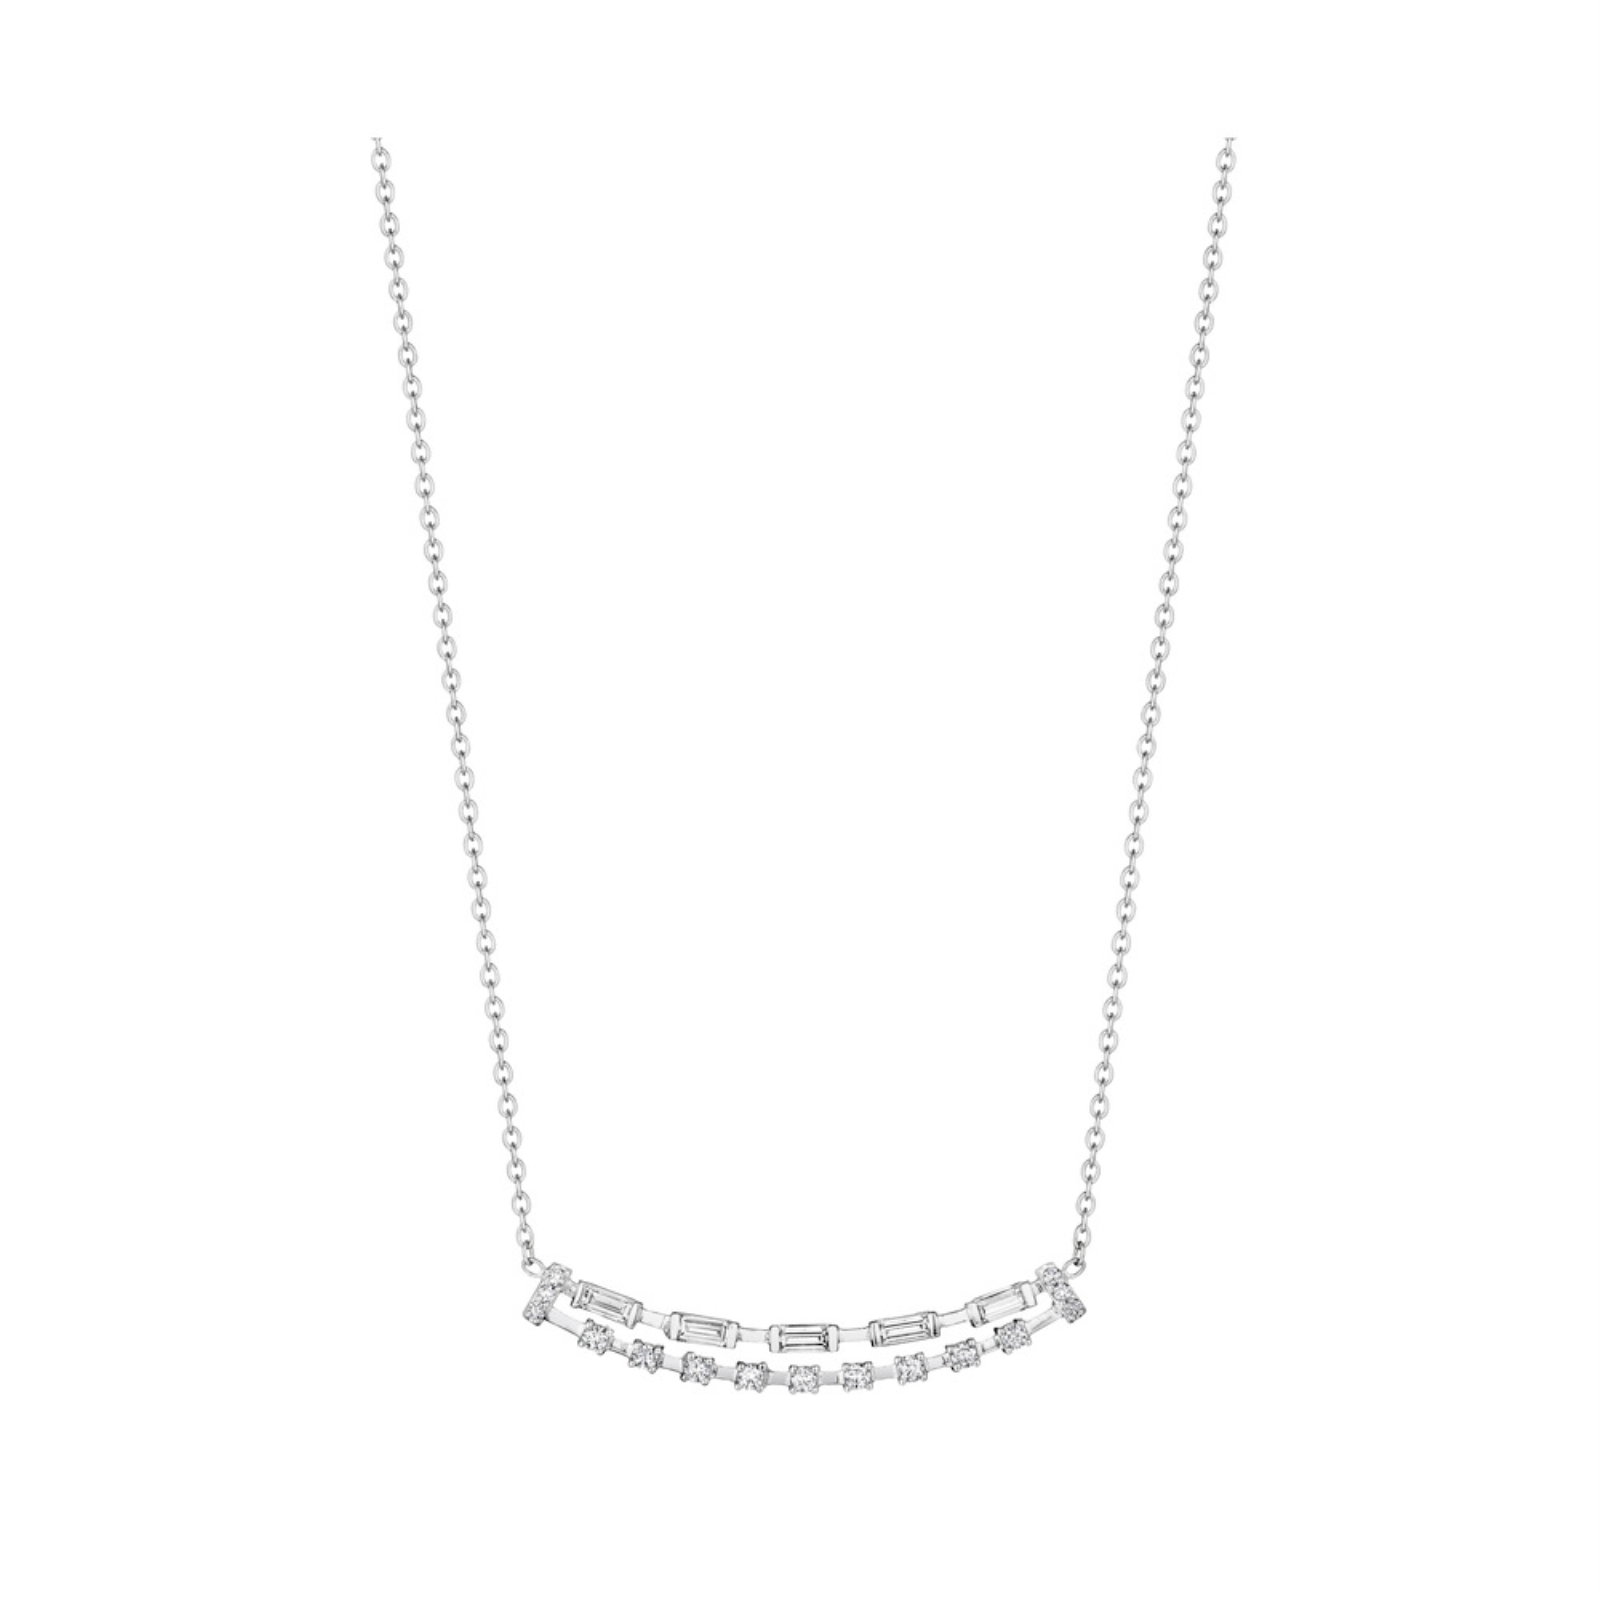 White Gold and Diamond Double Bar Necklace